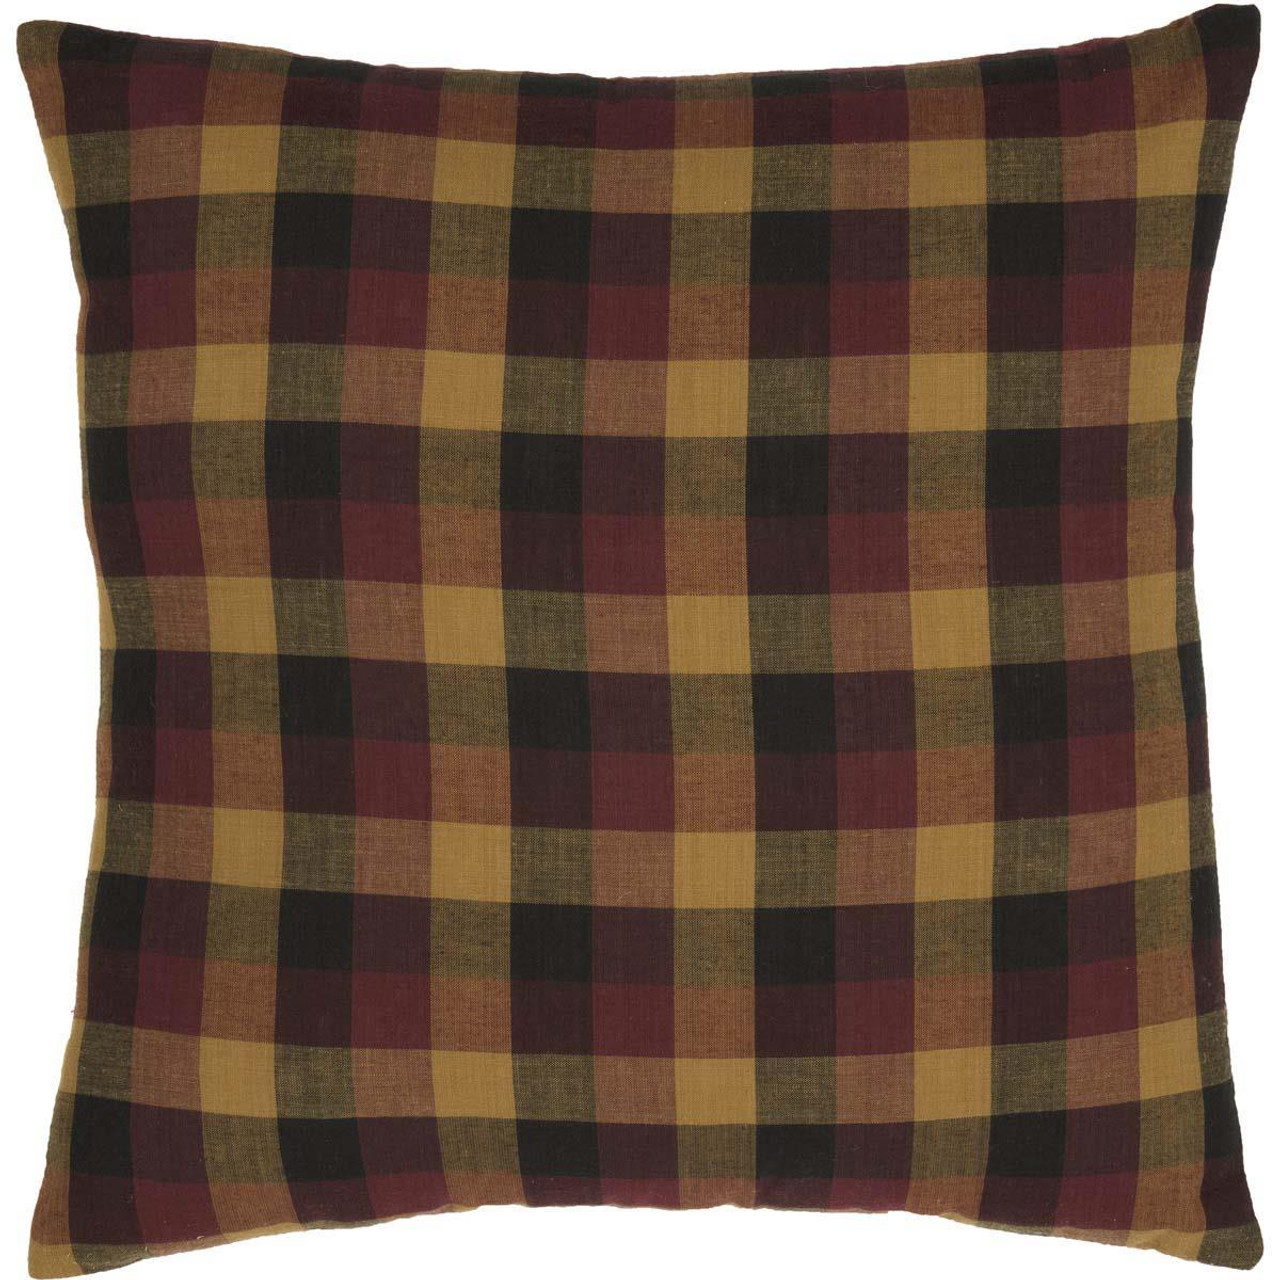 https://cdn11.bigcommerce.com/s-tfdhmk/images/stencil/1280x1280/products/21208/155732/Heritage-Farms-Primitive-Check-Pillow-16x16-840528160295_image1__82906.1667561025.jpg?c=2